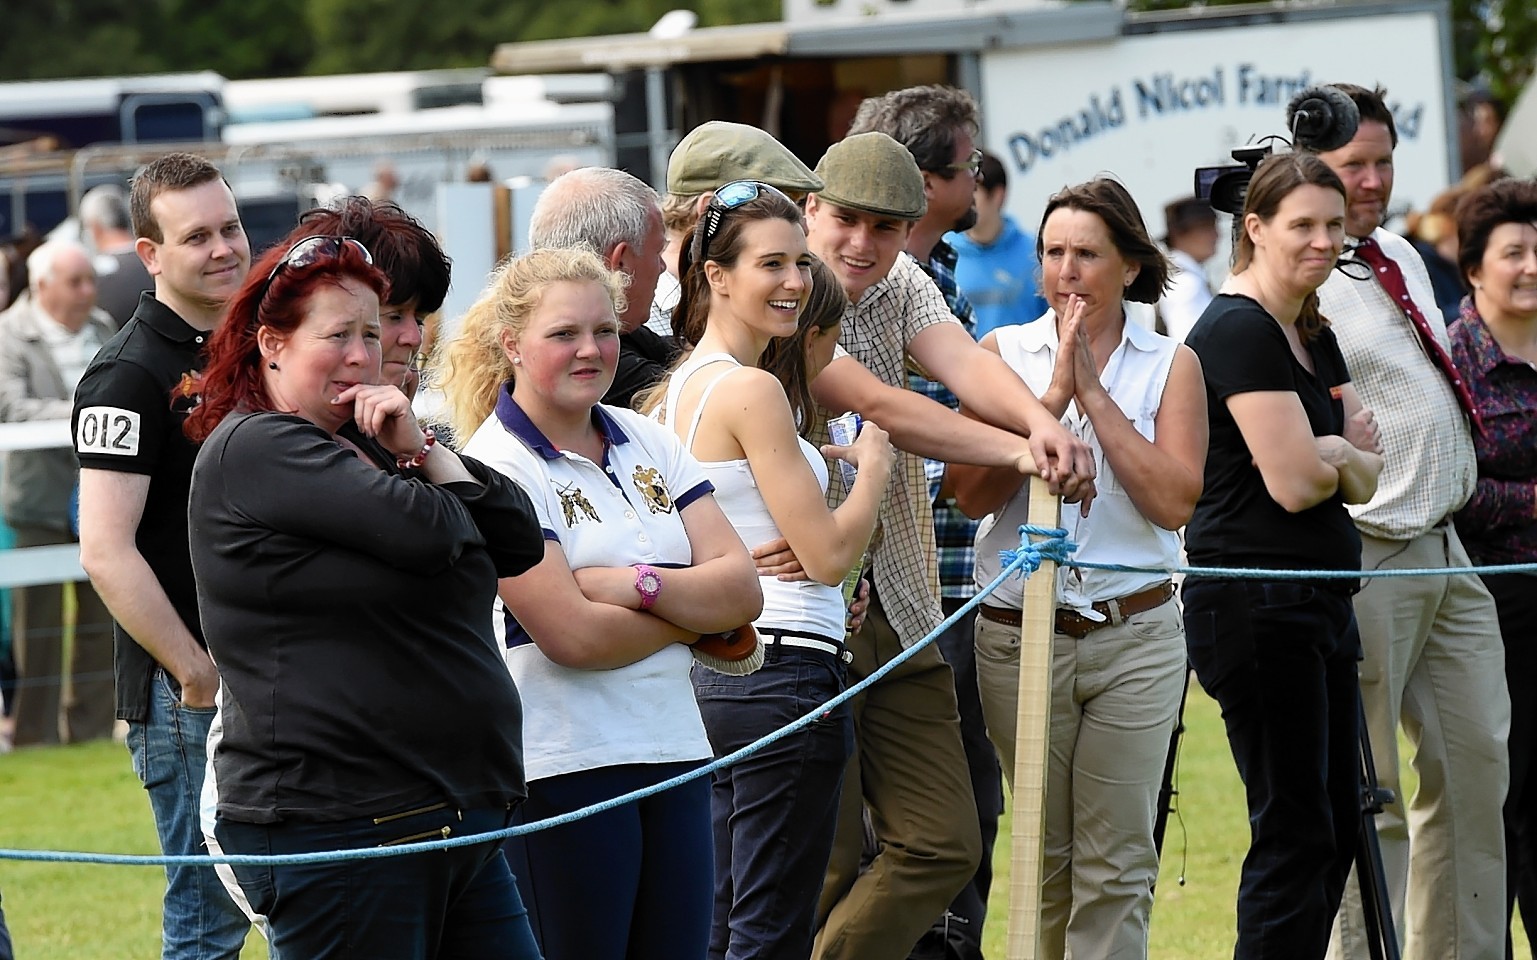 Spectators watching the horse judging at the Turriff Show. Picture by Kevin Emslie